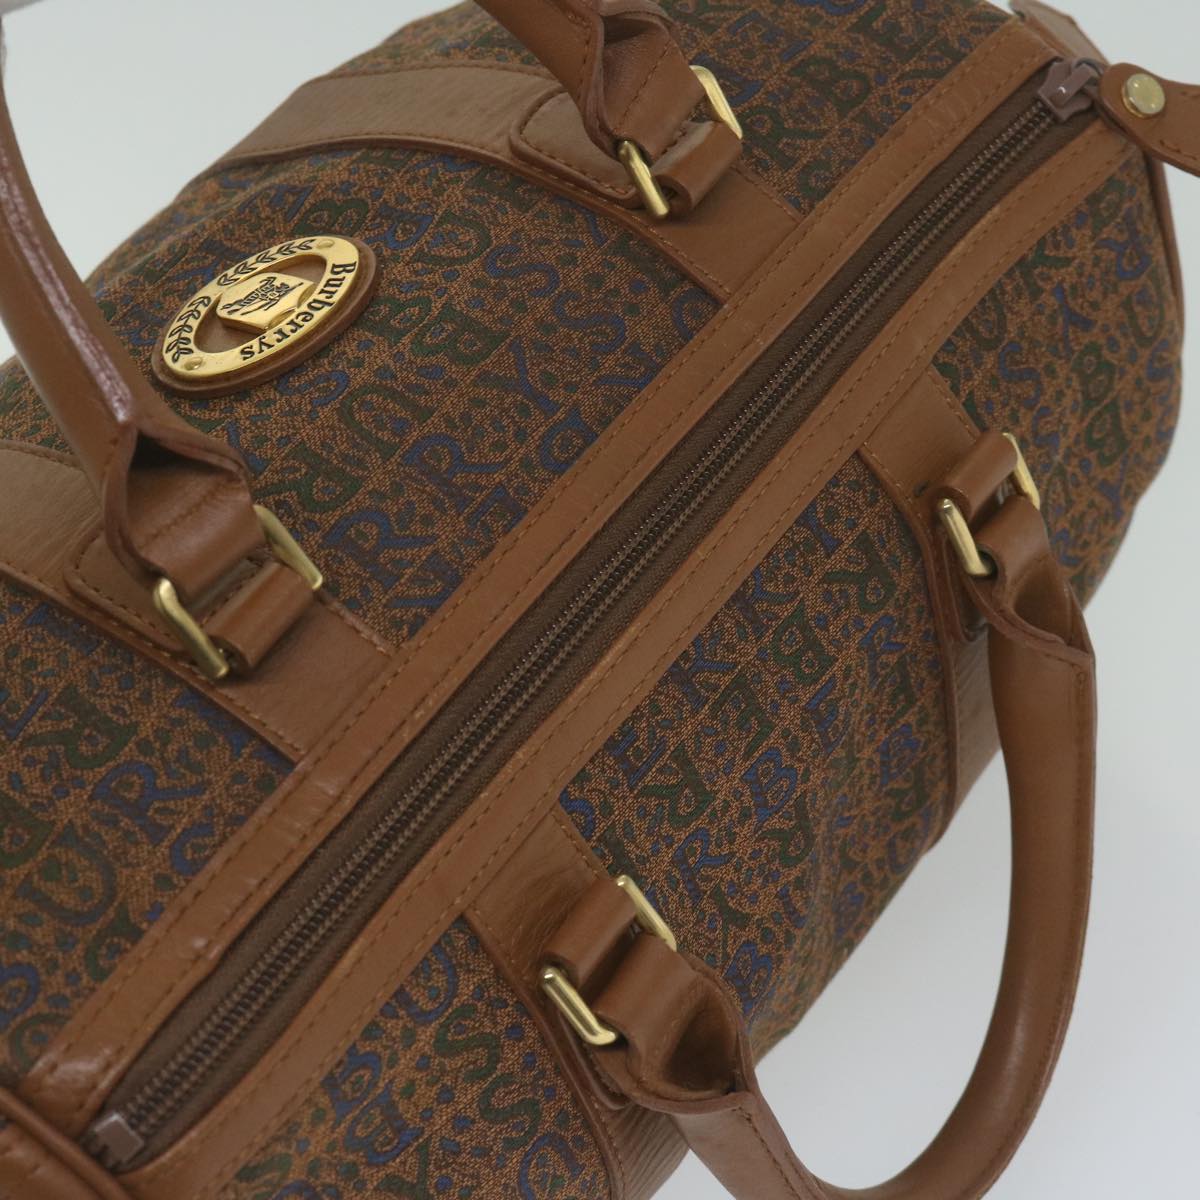 Burberrys Hand Bag Canvas Brown Auth bs10724